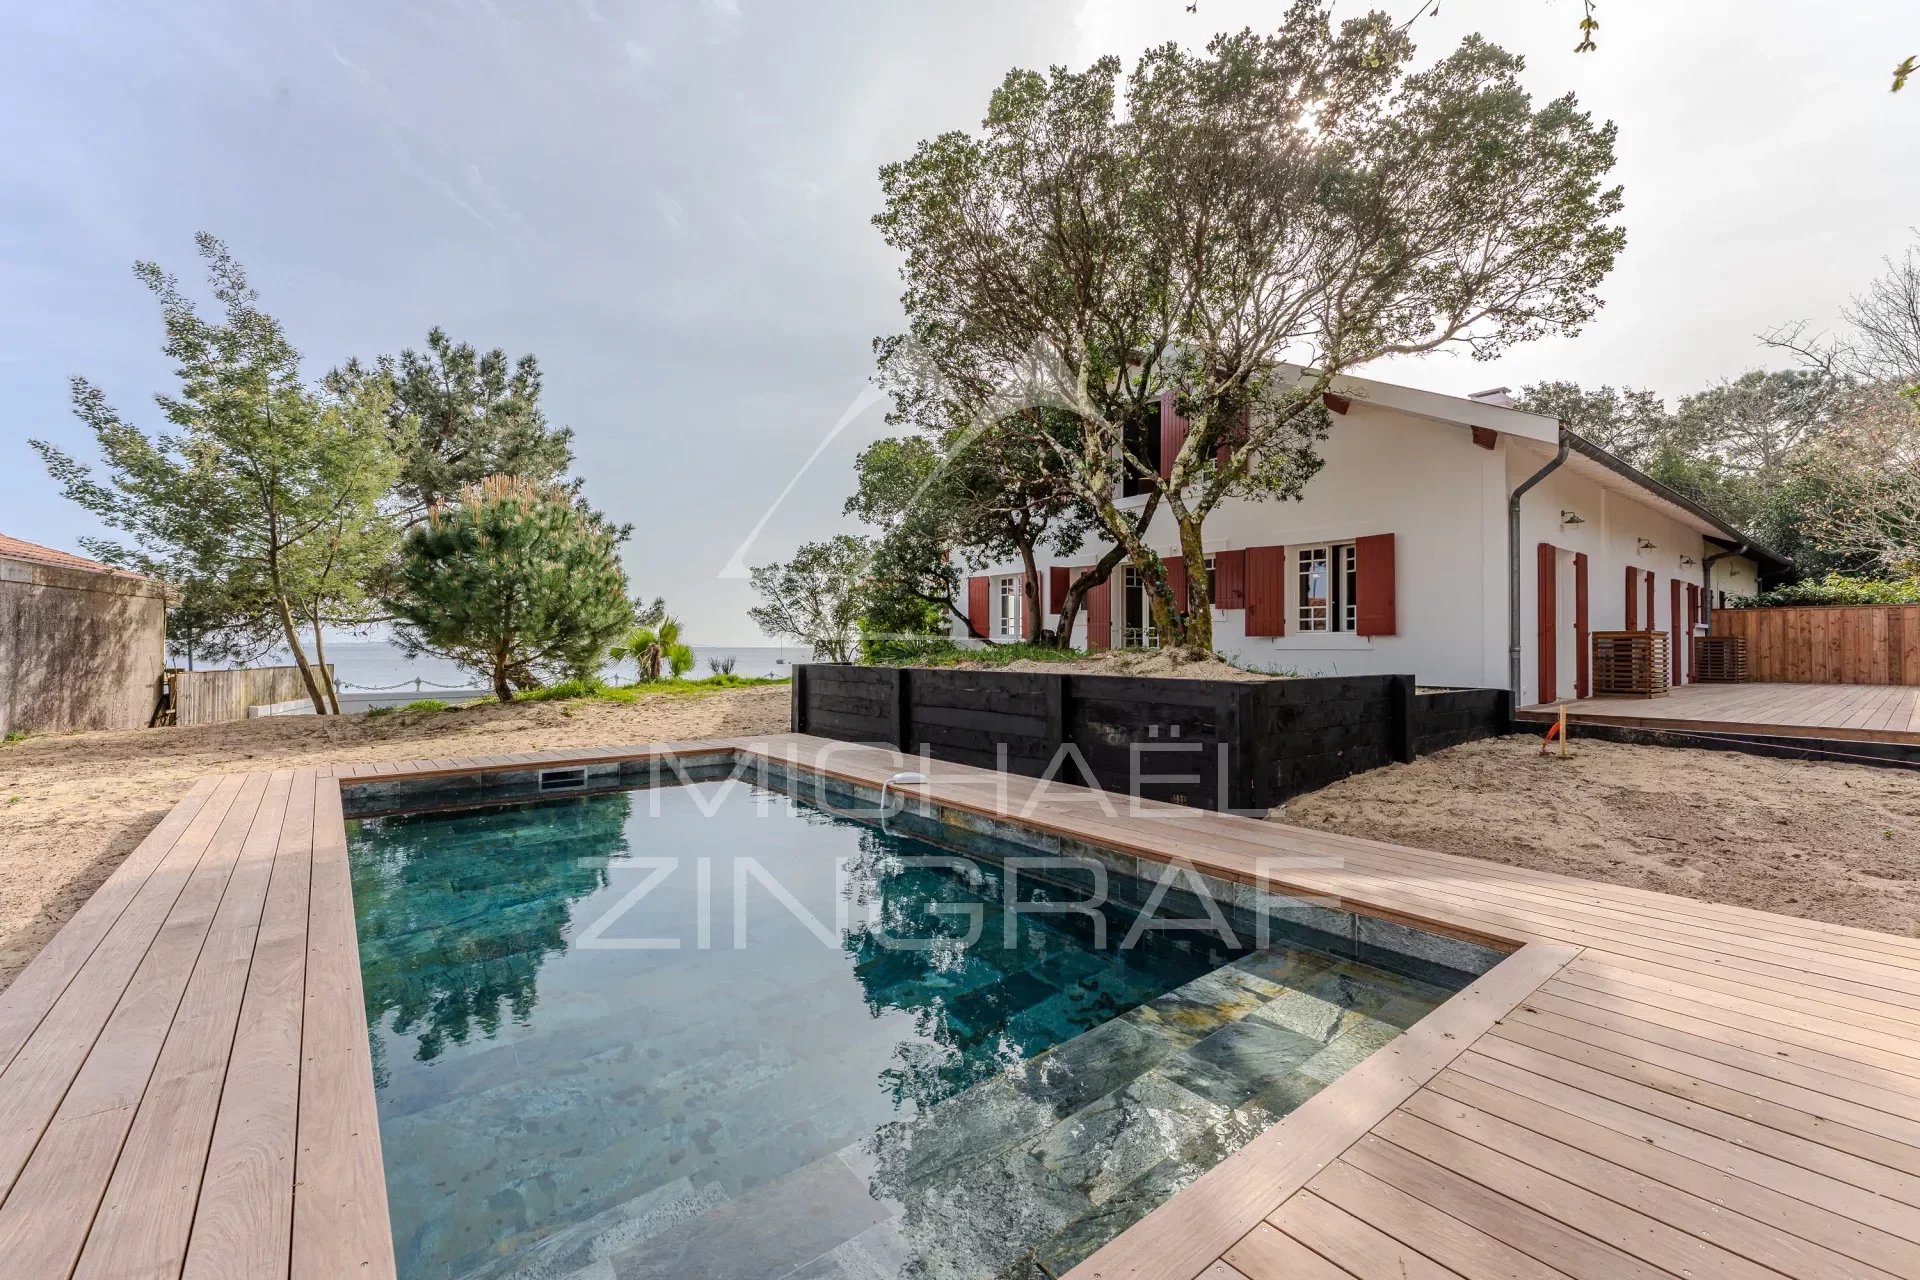 Villa with panoramic view of the Bay of Arcachon